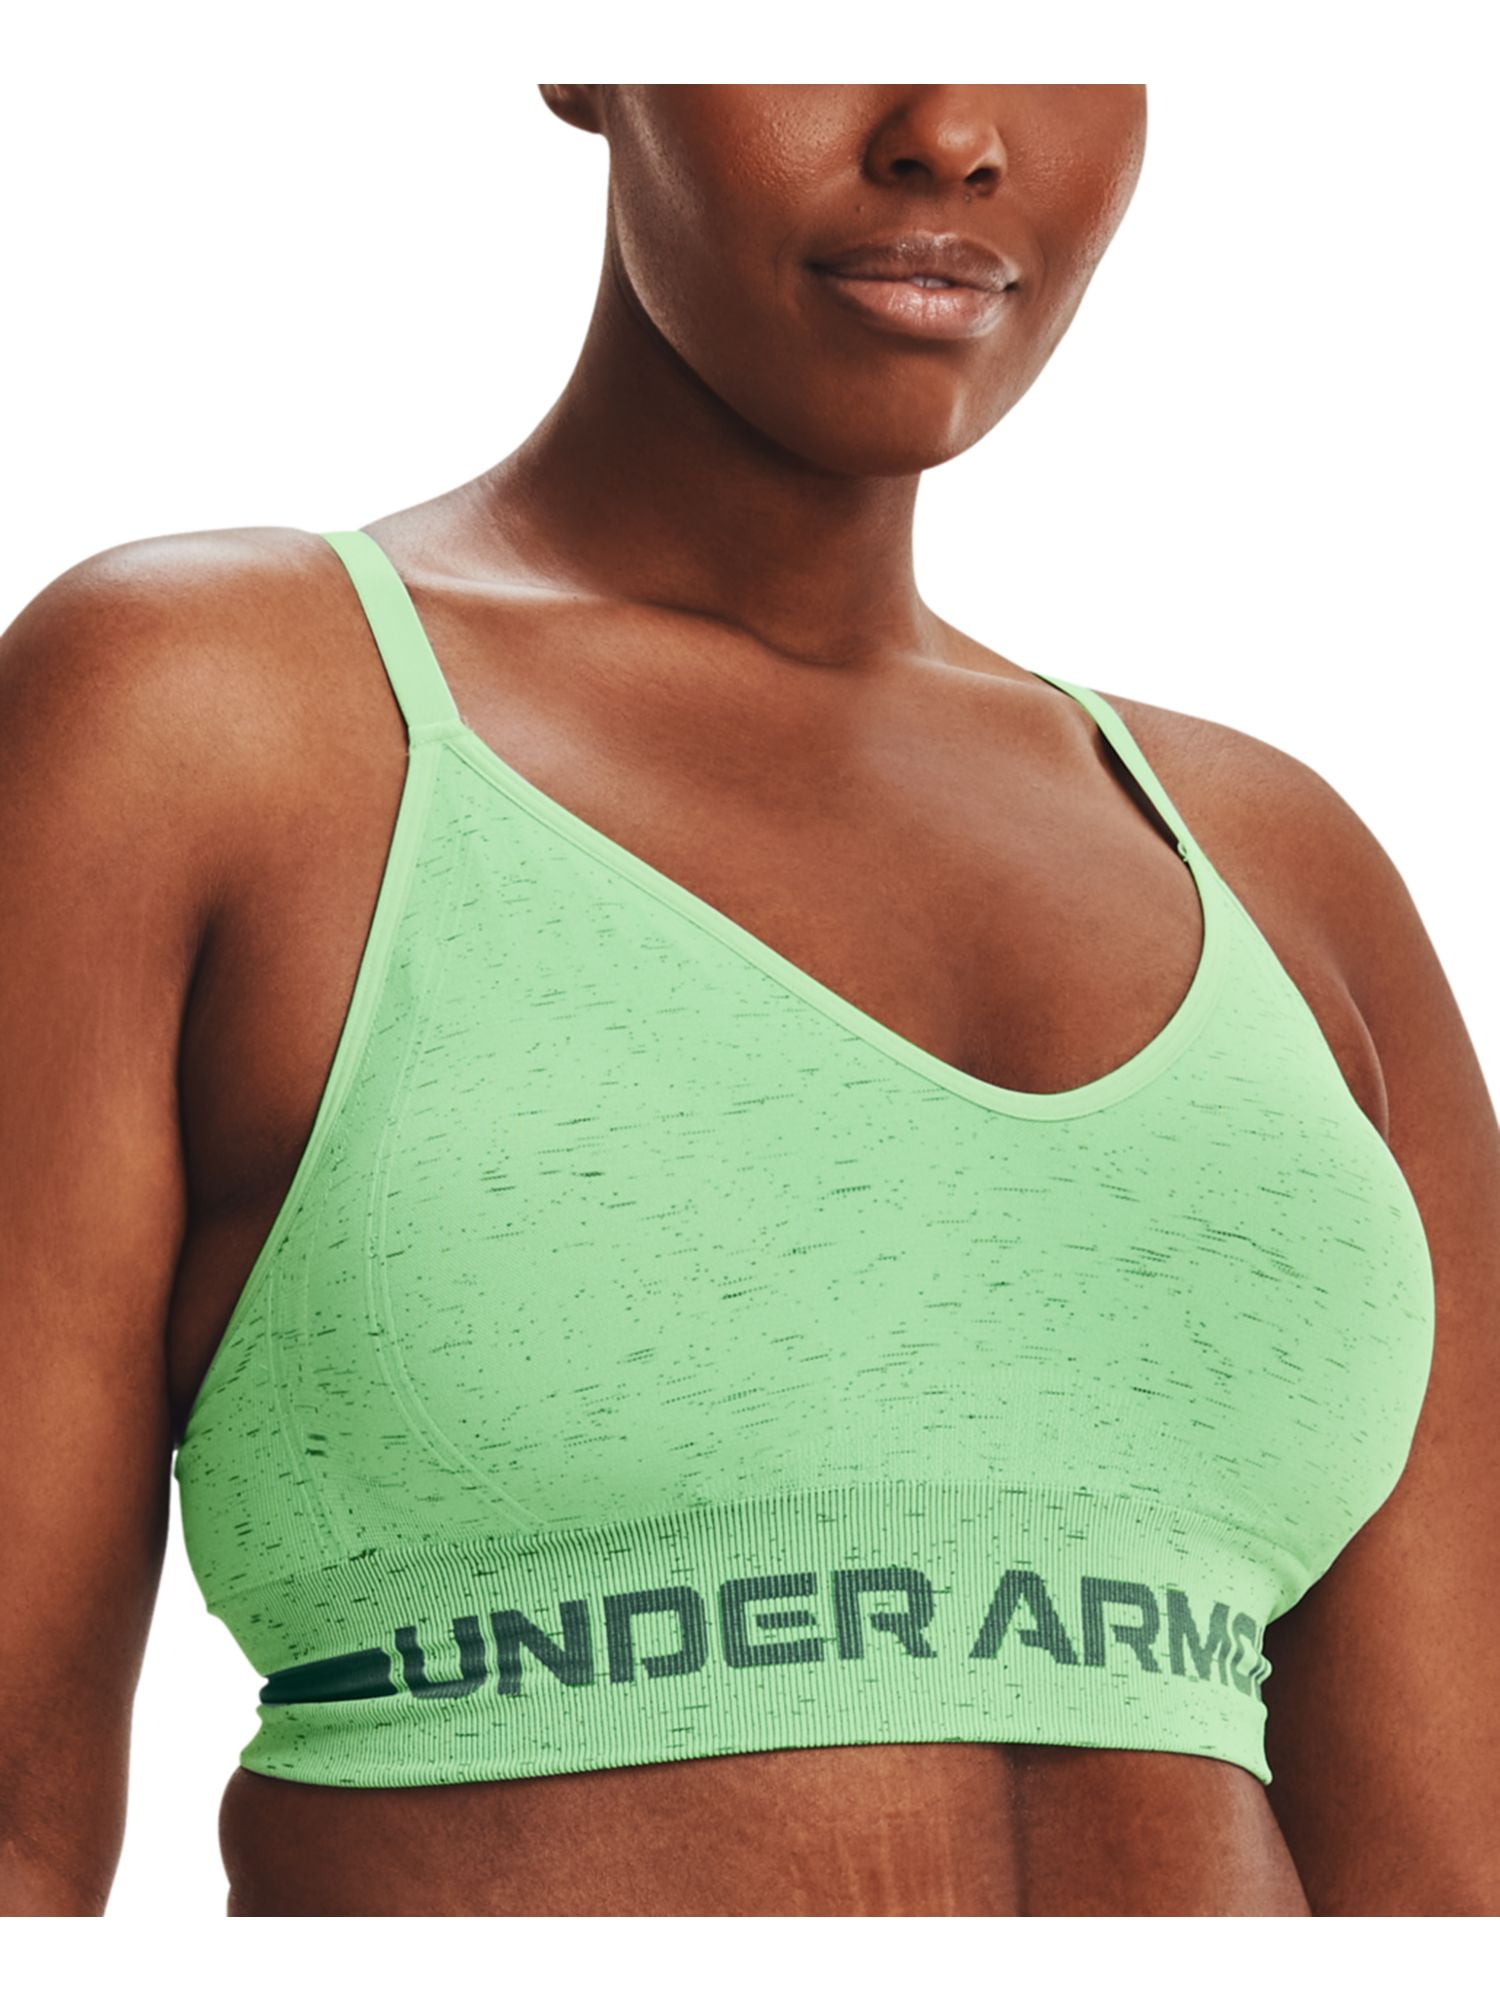 UNDER ARMOUR Intimates Green Ribbed Strappy Light Ghana